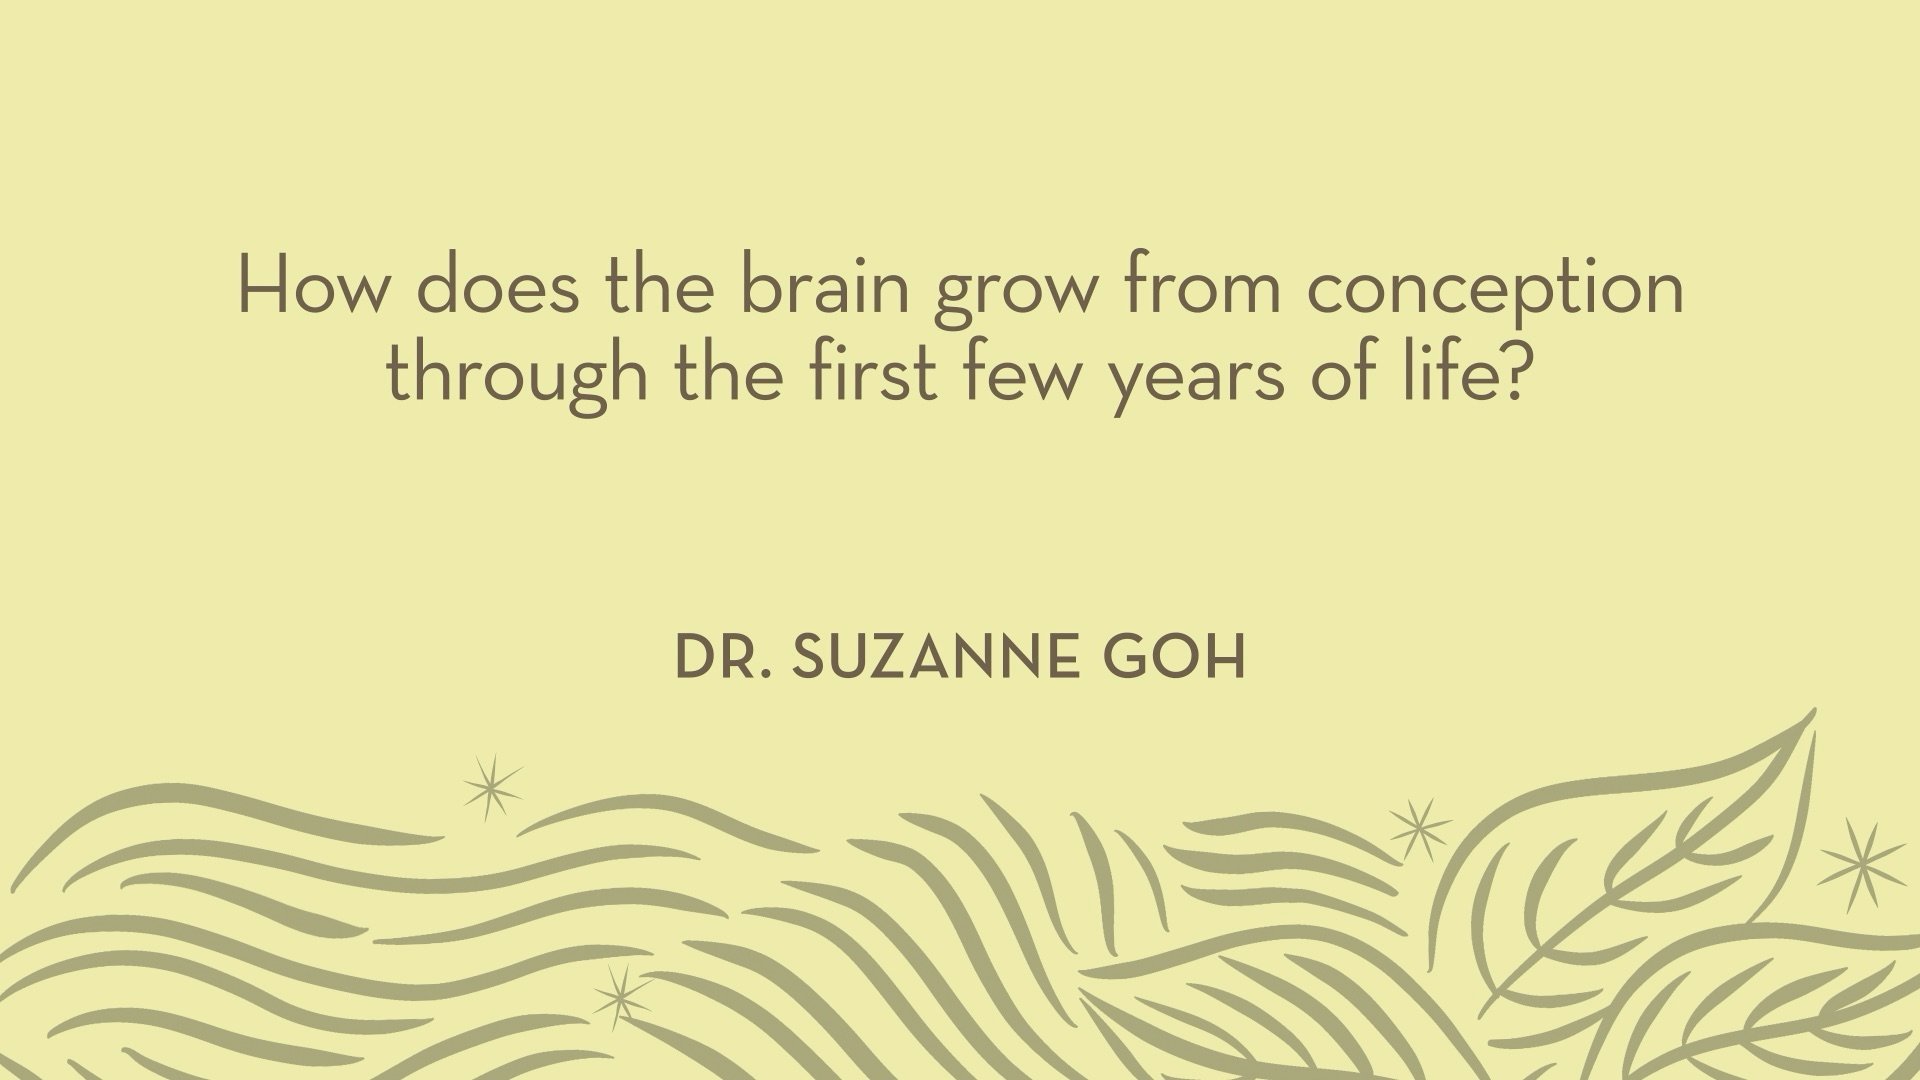 Dr. Goh | How does the brain grow from conception through the first few years of life?